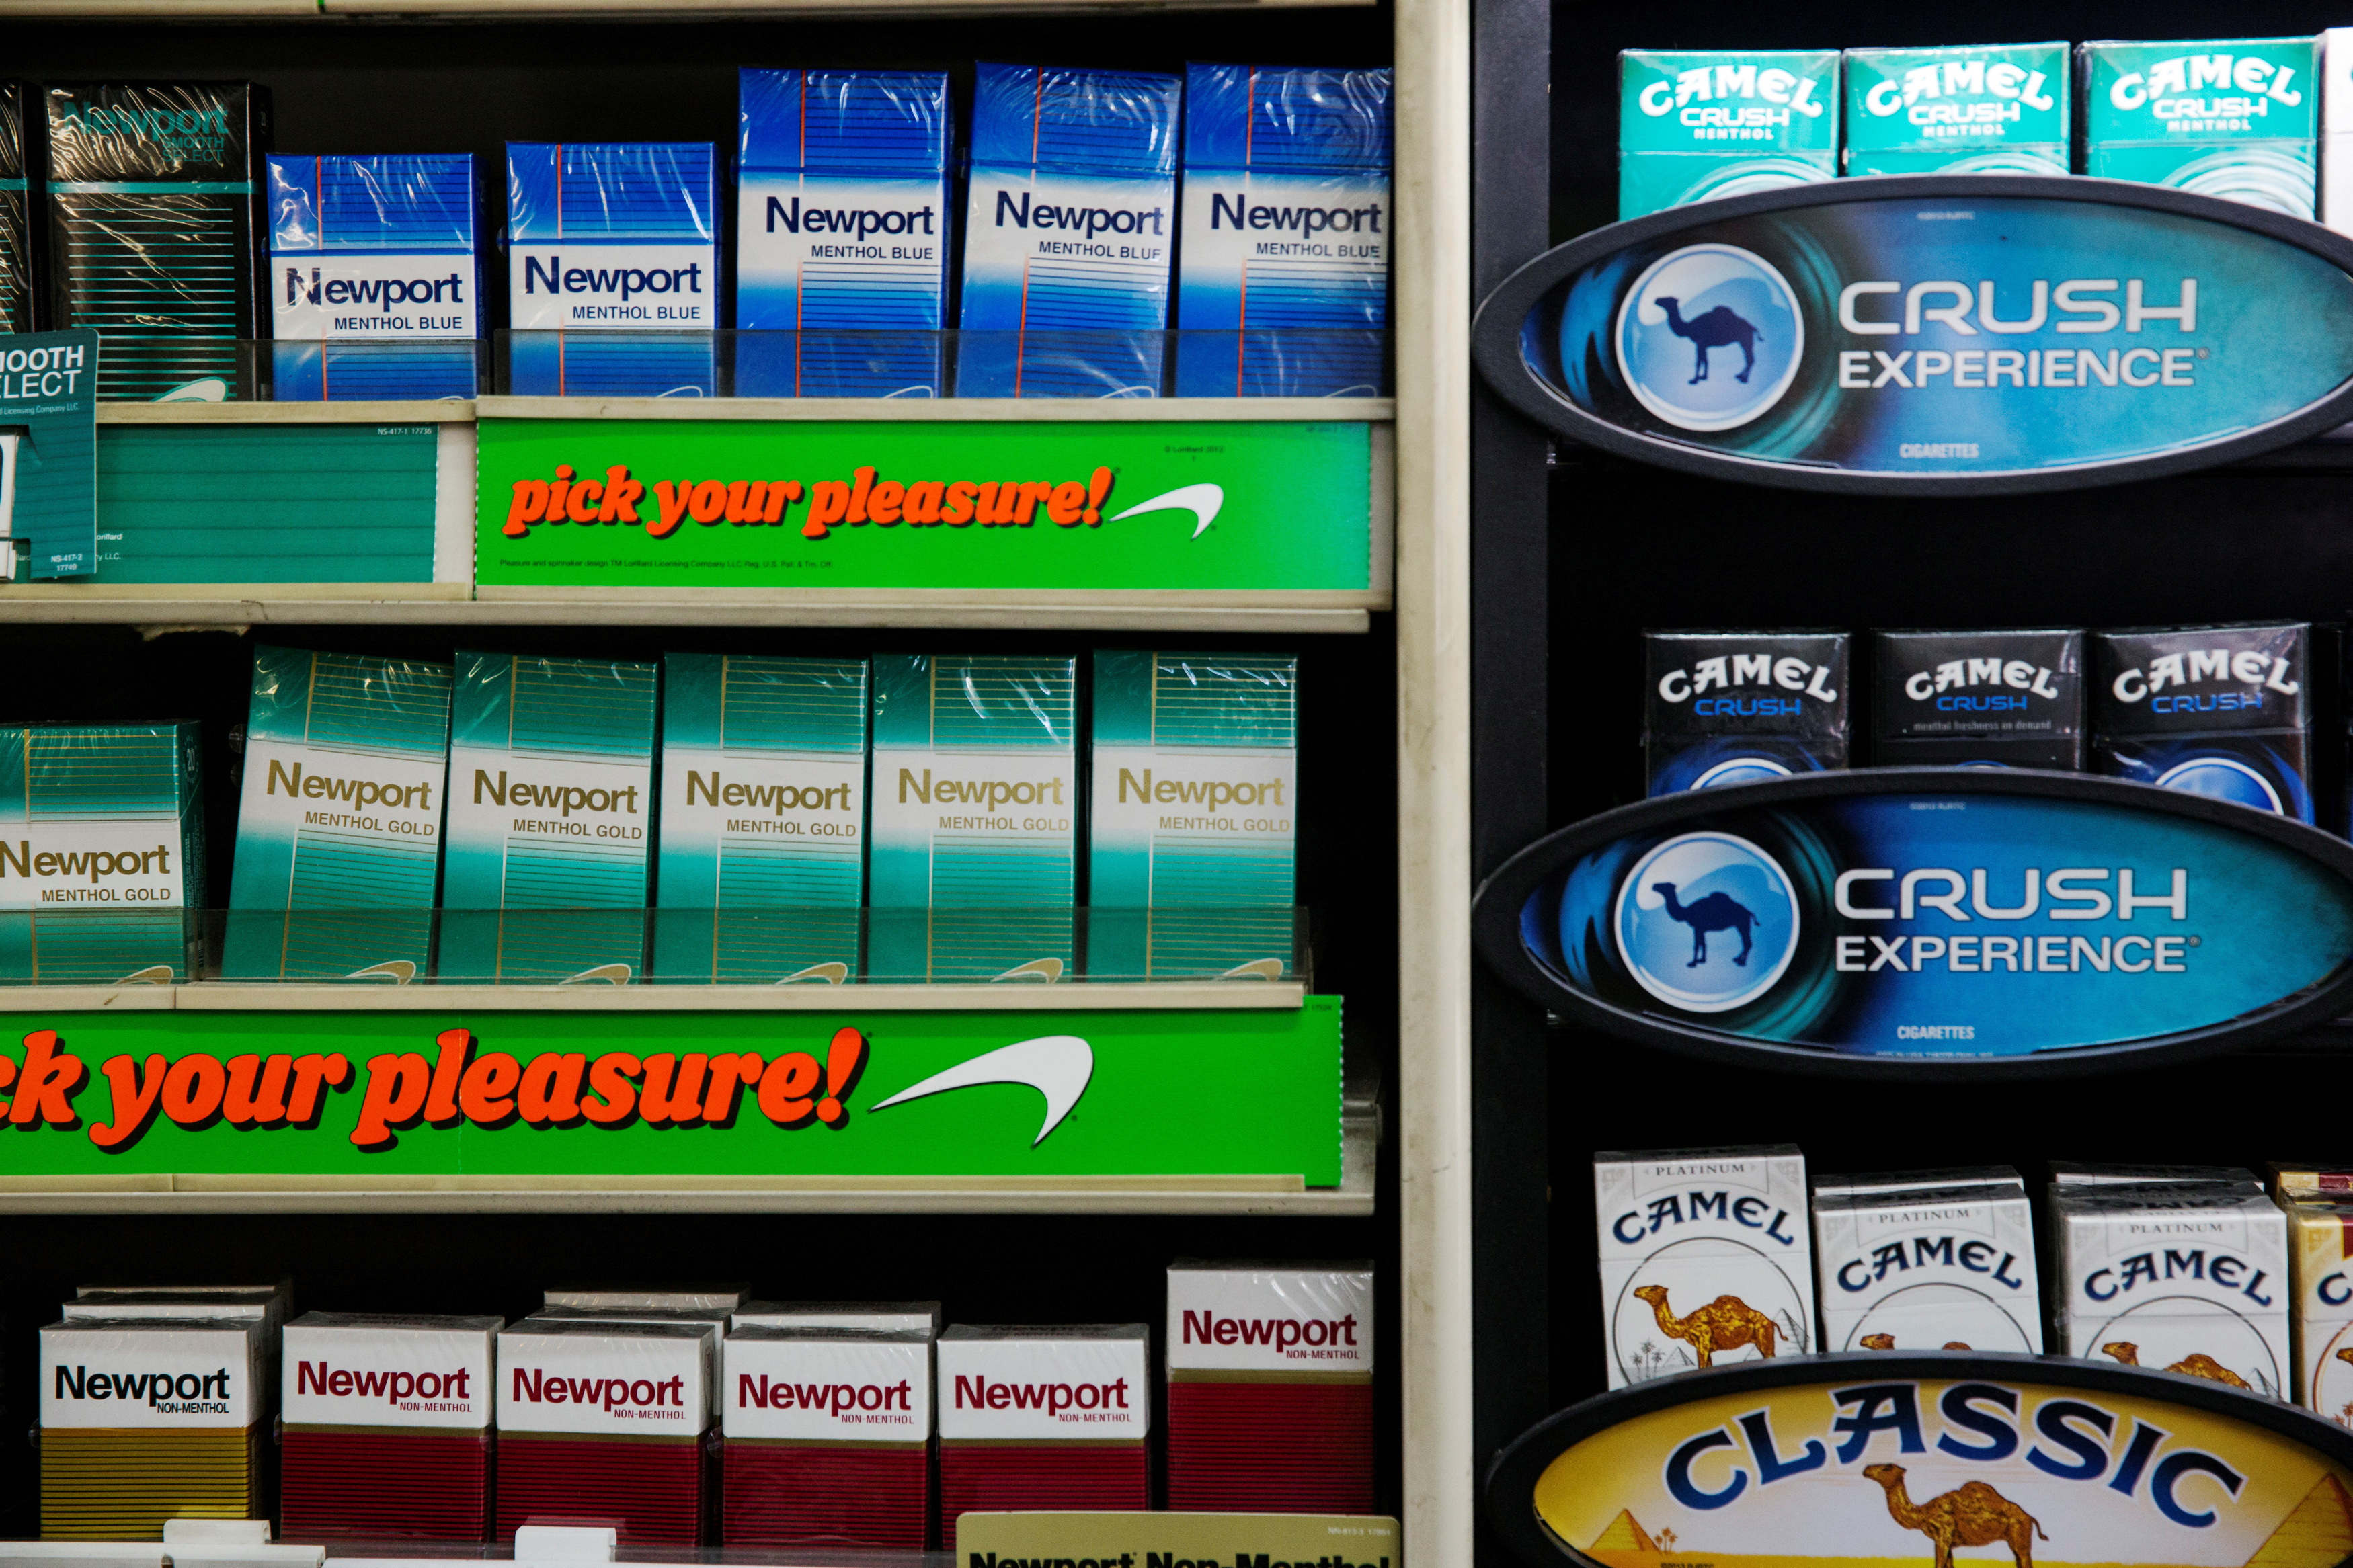 Newport and Camel cigarettes are stacked on a shelf inside a tobacco store in New York